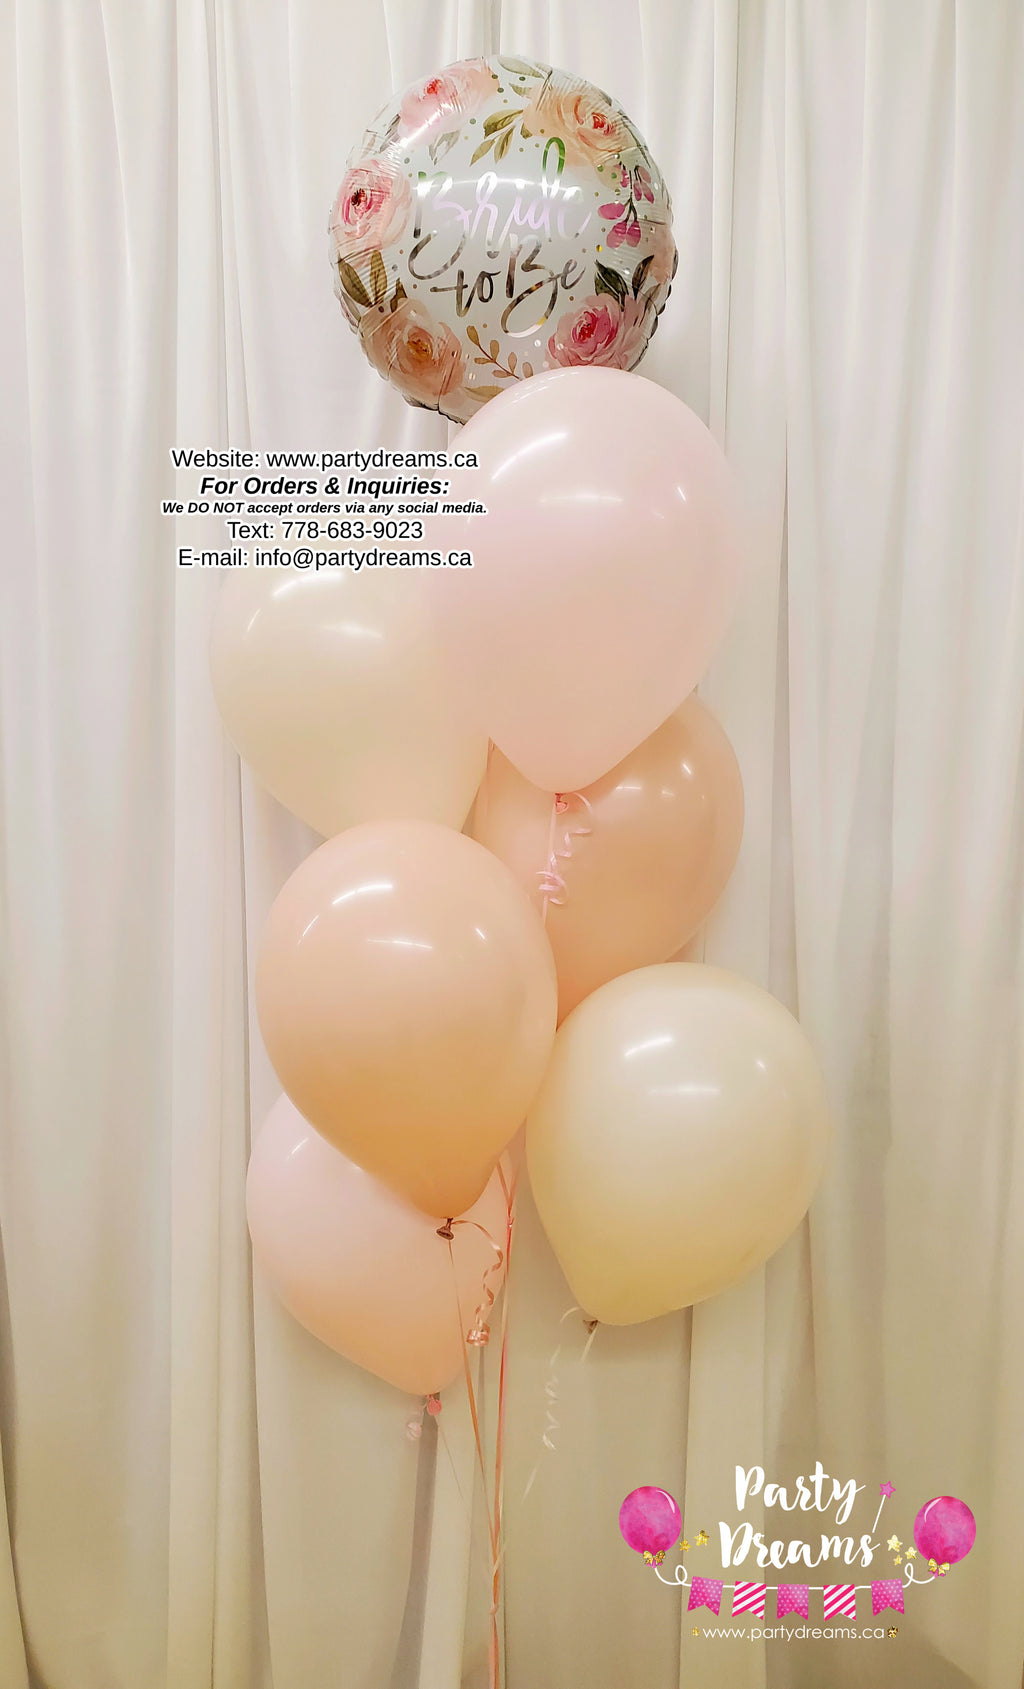 Bride-To-Be Wishes ~ Bridal Shower Balloon Bouquet #500